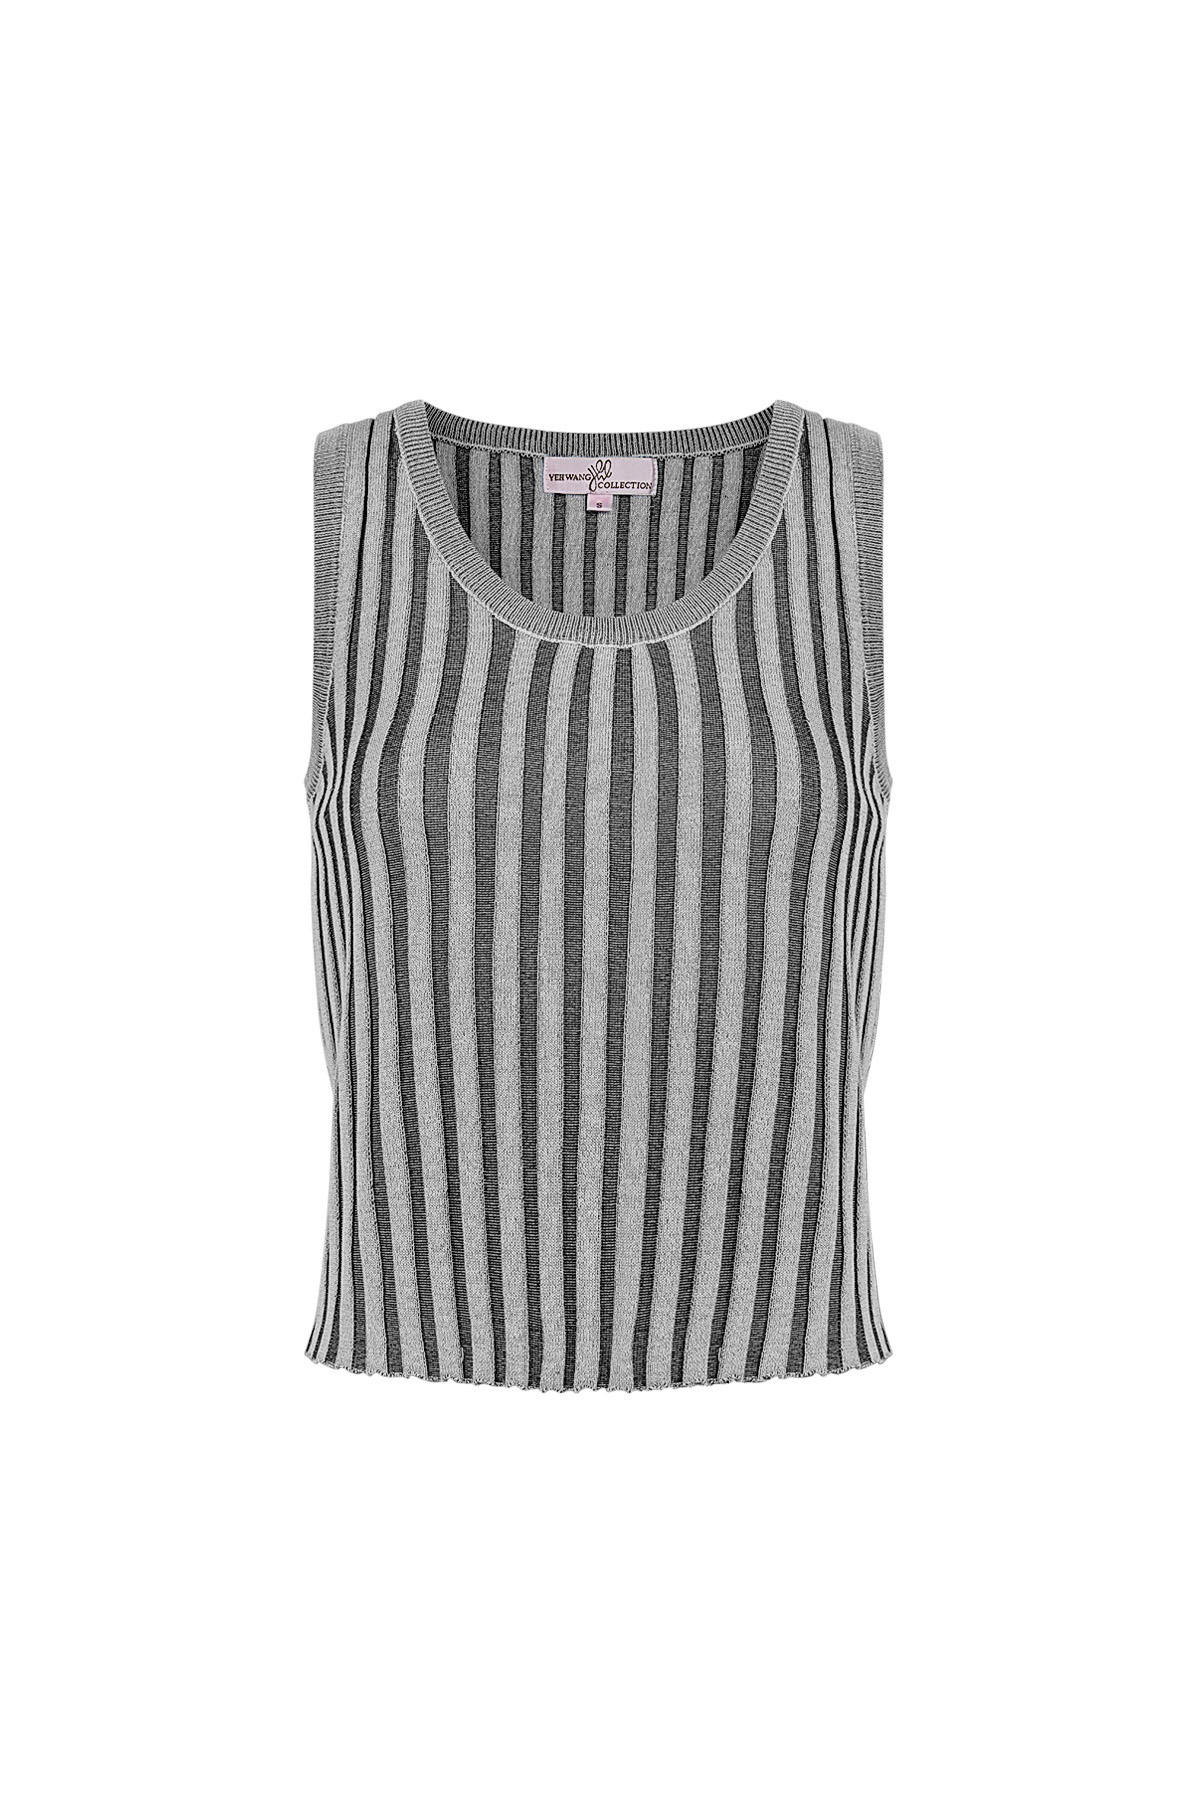 Sleeveless, striped top large - gray